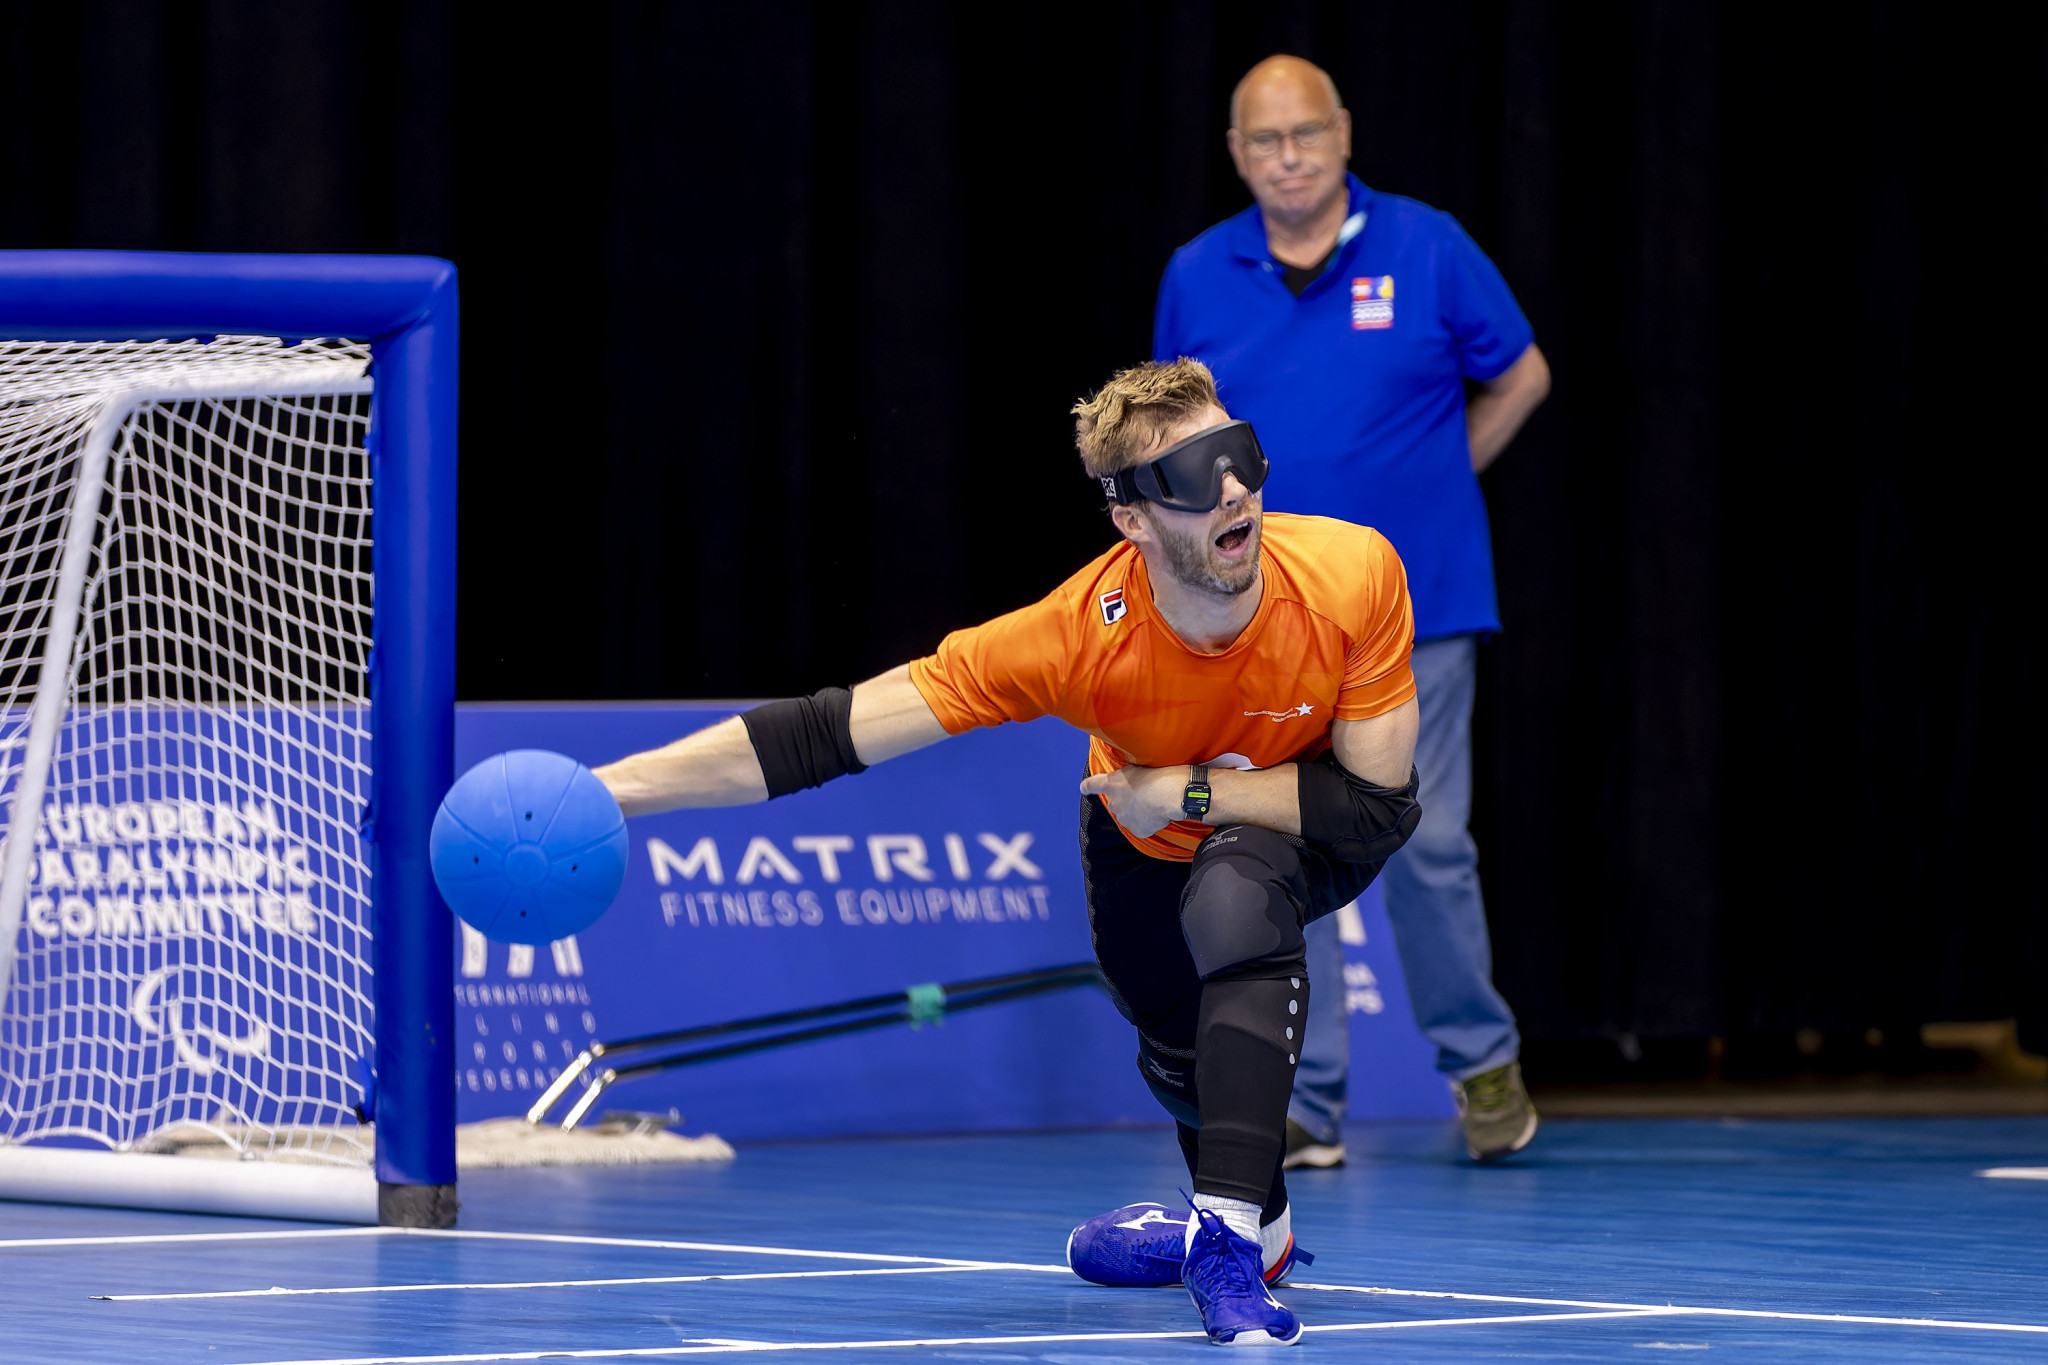 Goalball matches were played at the European Para Championships for the first time ©EPC